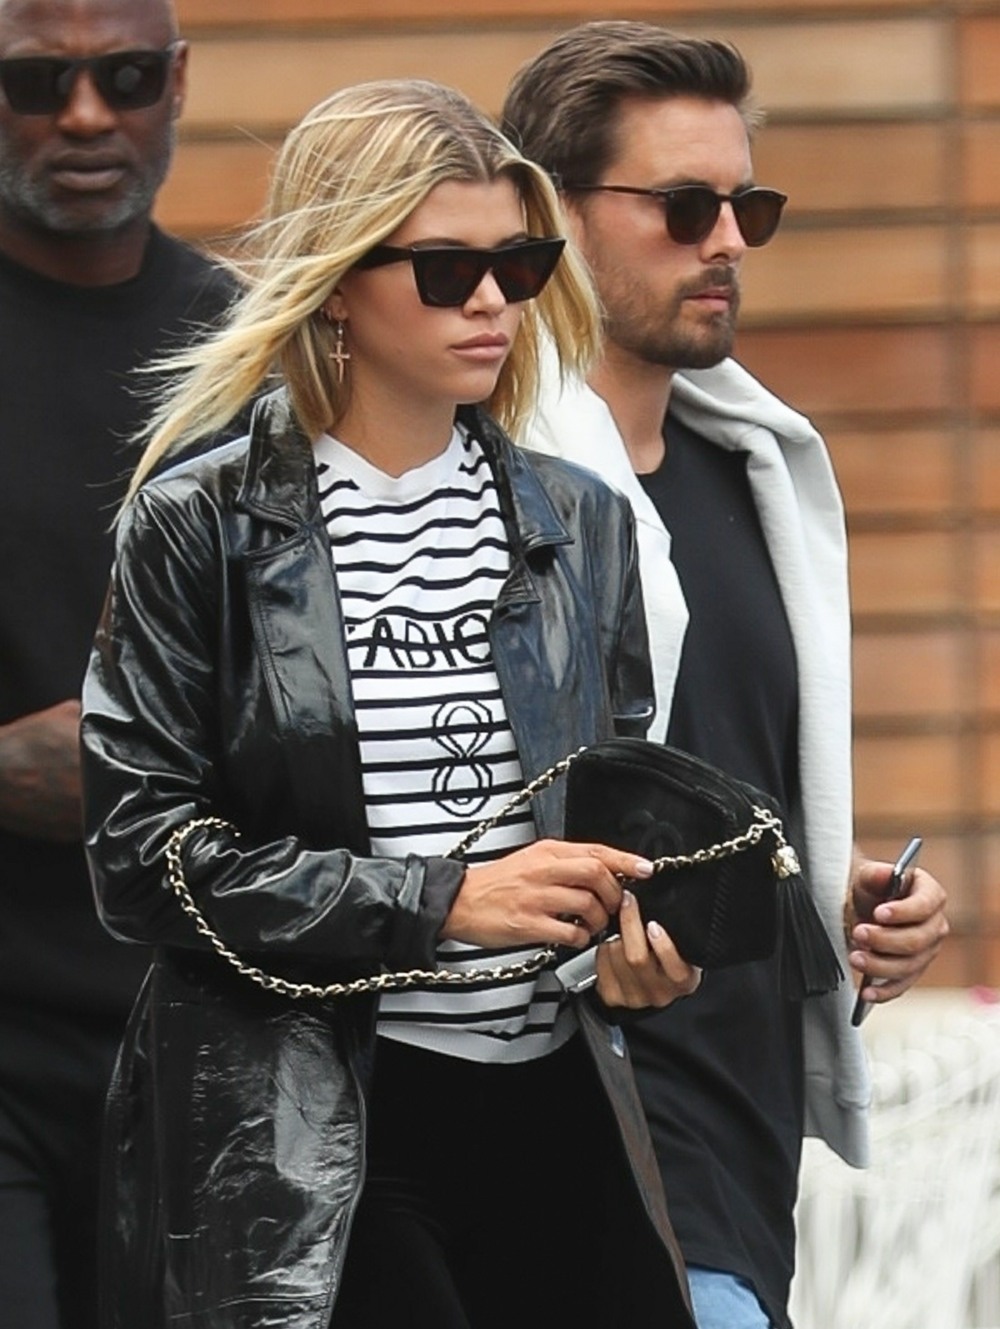 Sofia Richie and Scott Disick are a couple that shop together!